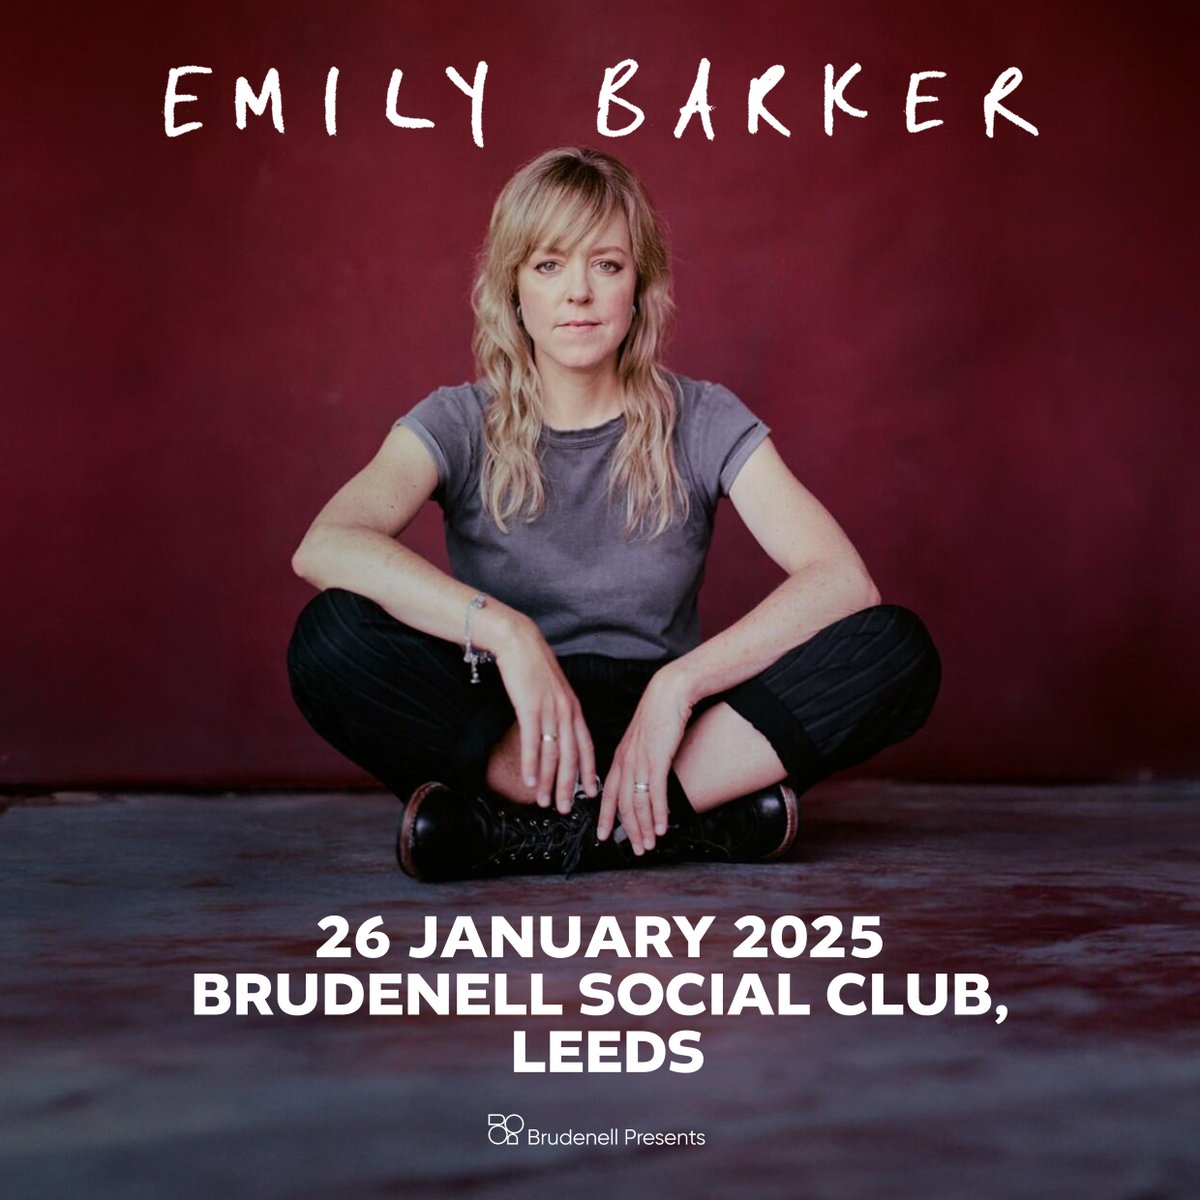 ✨ 'An album of spare, striking beauty' - @MOJOmagazine ✨ The new @emilybarkerhalo album, 'Fragile As Humans' comes out TOMORROW & we're delighted to welcome her back to The Brudenell next January. 🙌 Grab your tickets from 10AM tomorrow! 🕙 ➡️ bit.ly/EmilyBarker-Lds